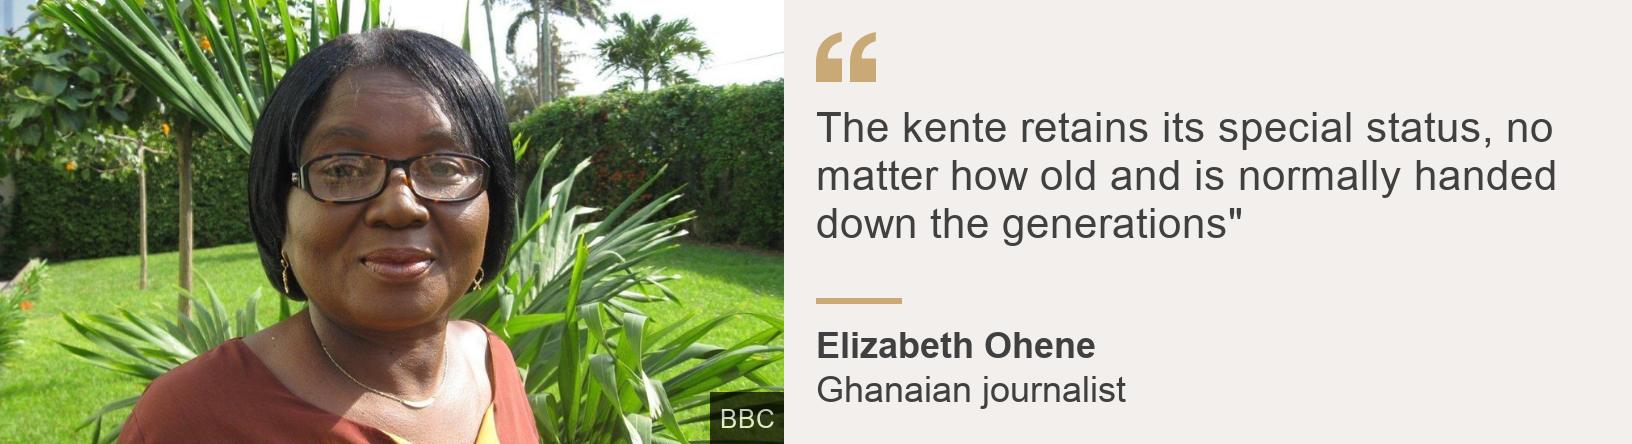 Letter from Africa: Kente - the Ghanaian cloth that's on the catwalk - BBC  News